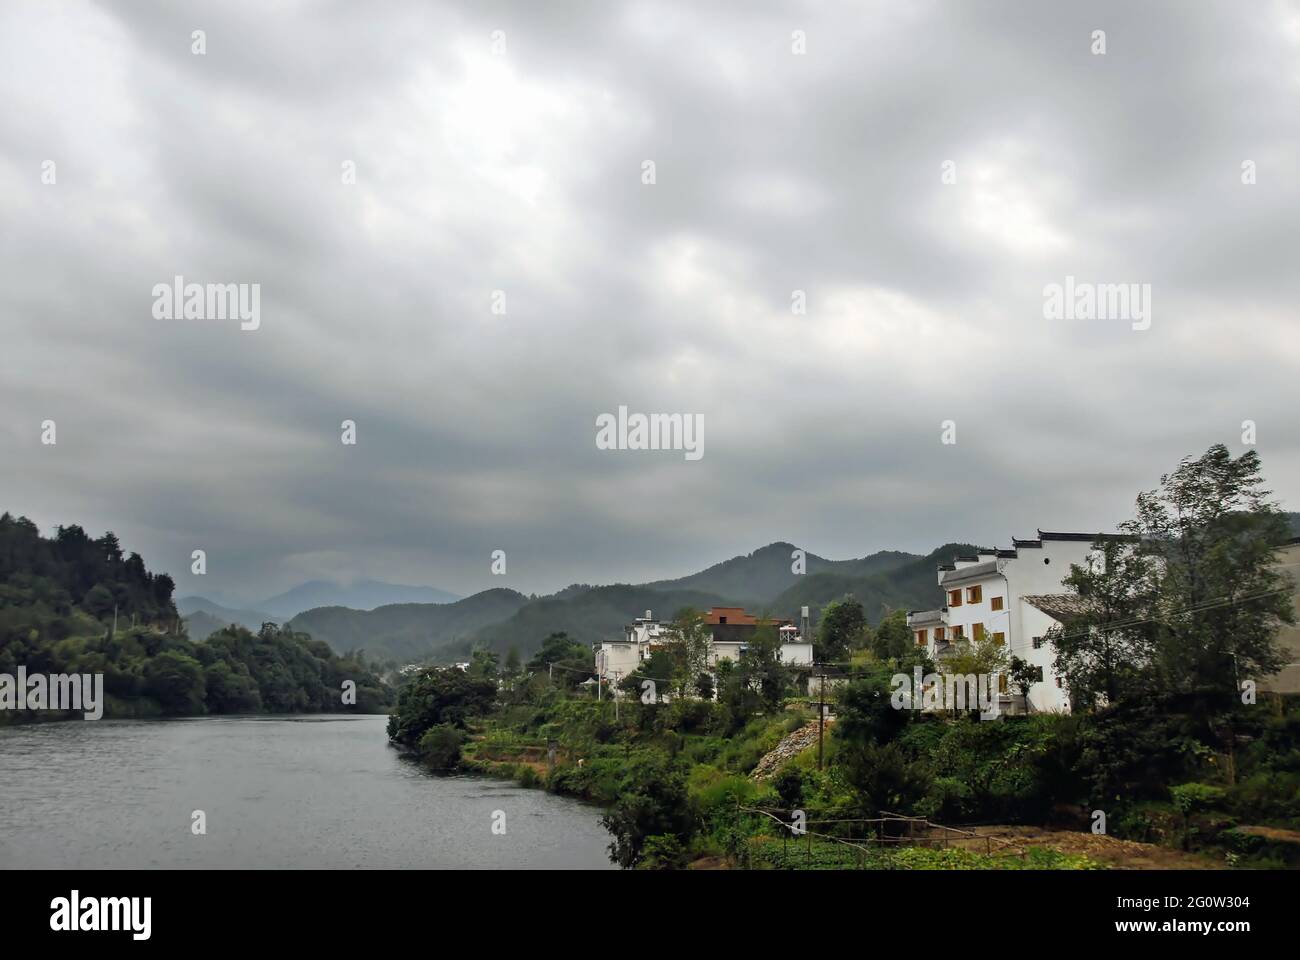 Wangkou in Wuyuan County, Jiangxi Province, China. Wangkou is an ancient town known for its Tang Dynasty architecture. Scenic view with river. Stock Photo